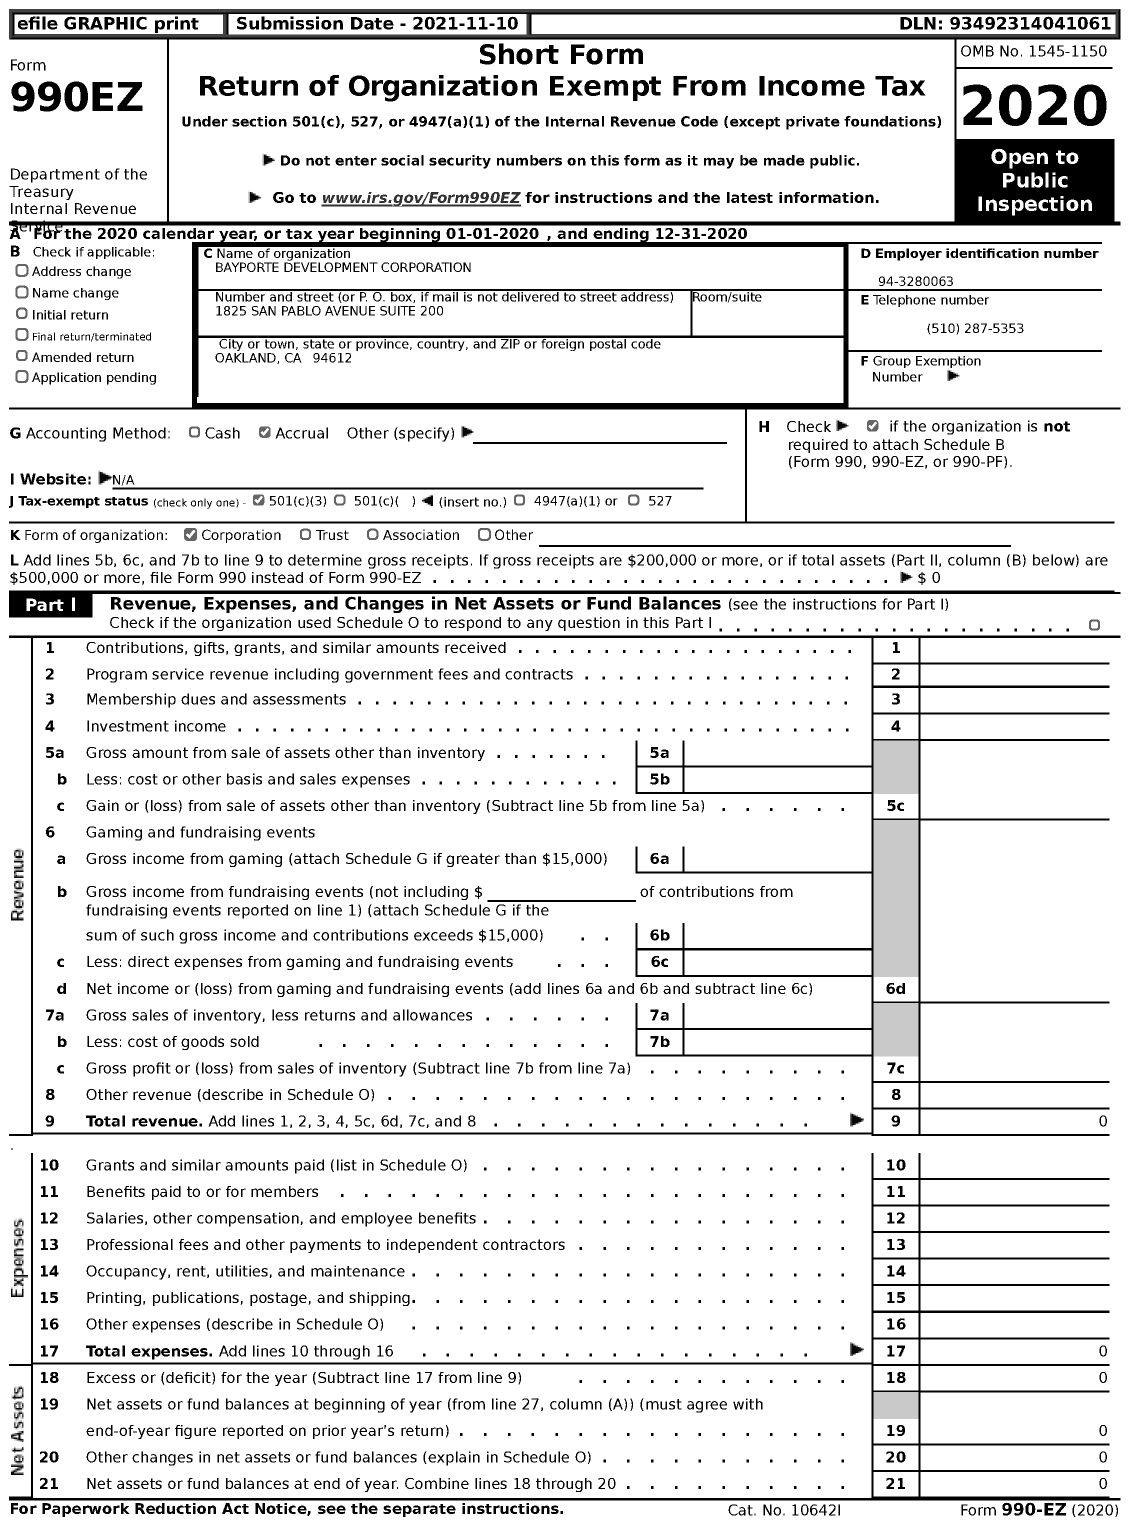 Image of first page of 2020 Form 990EZ for Bayporte Development Corporation